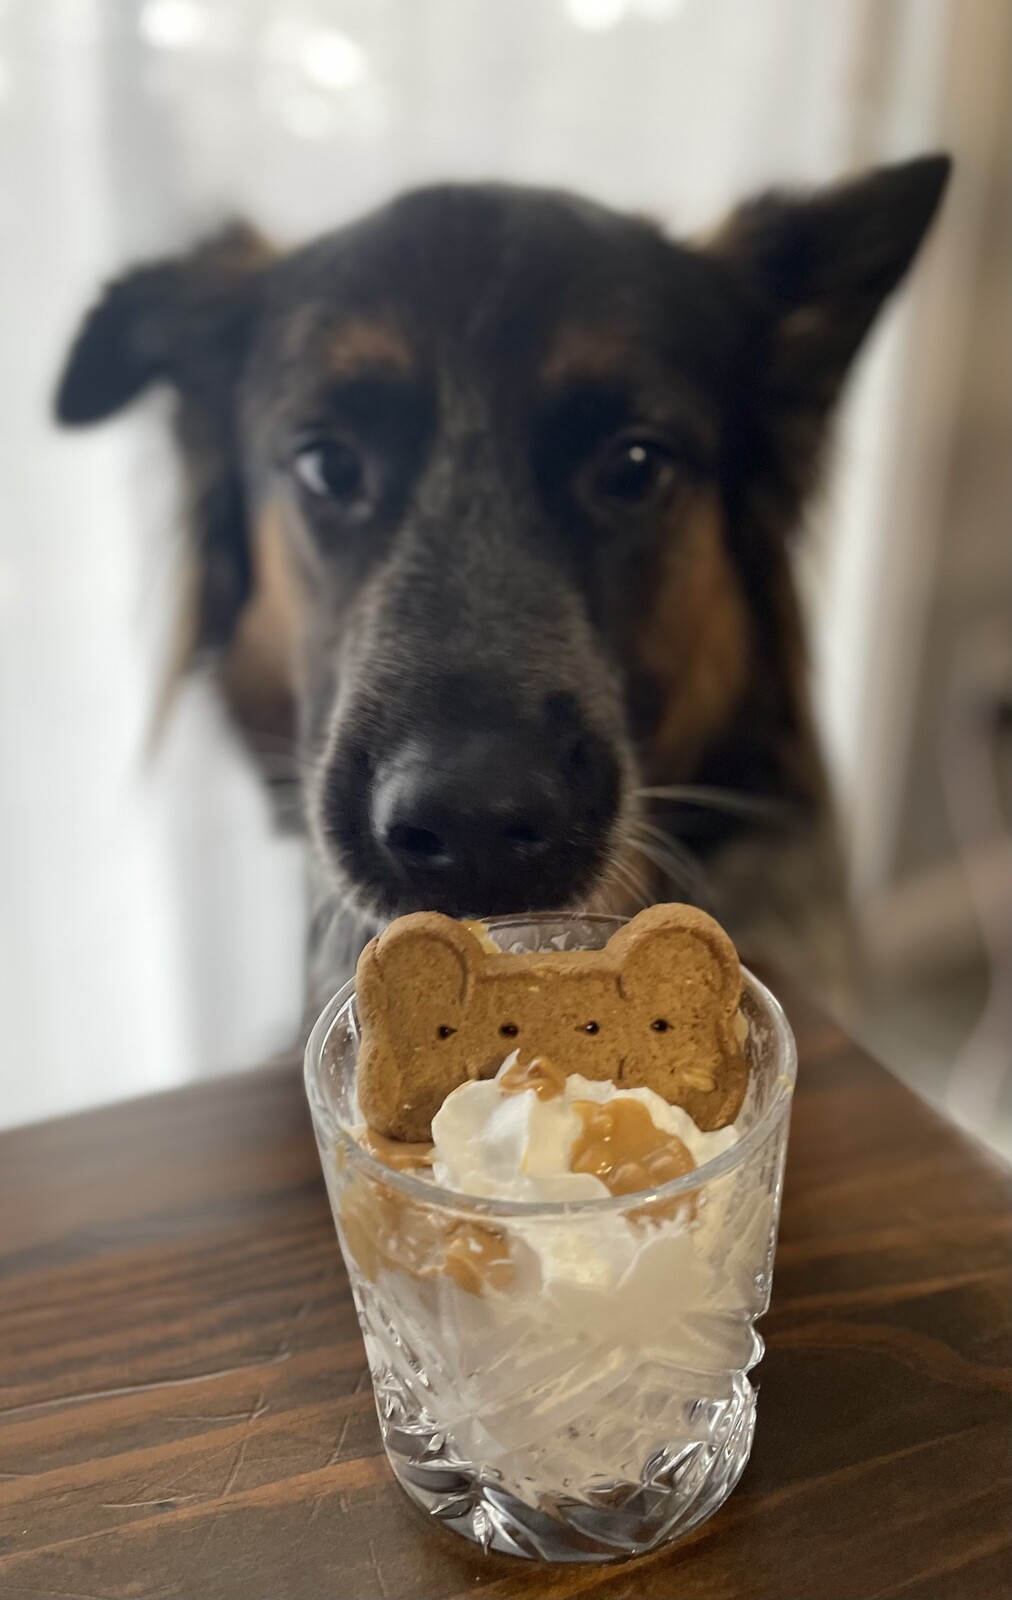 Learn more about Pup Cups! – Creamier Handcrafted Ice Cream and Coffee